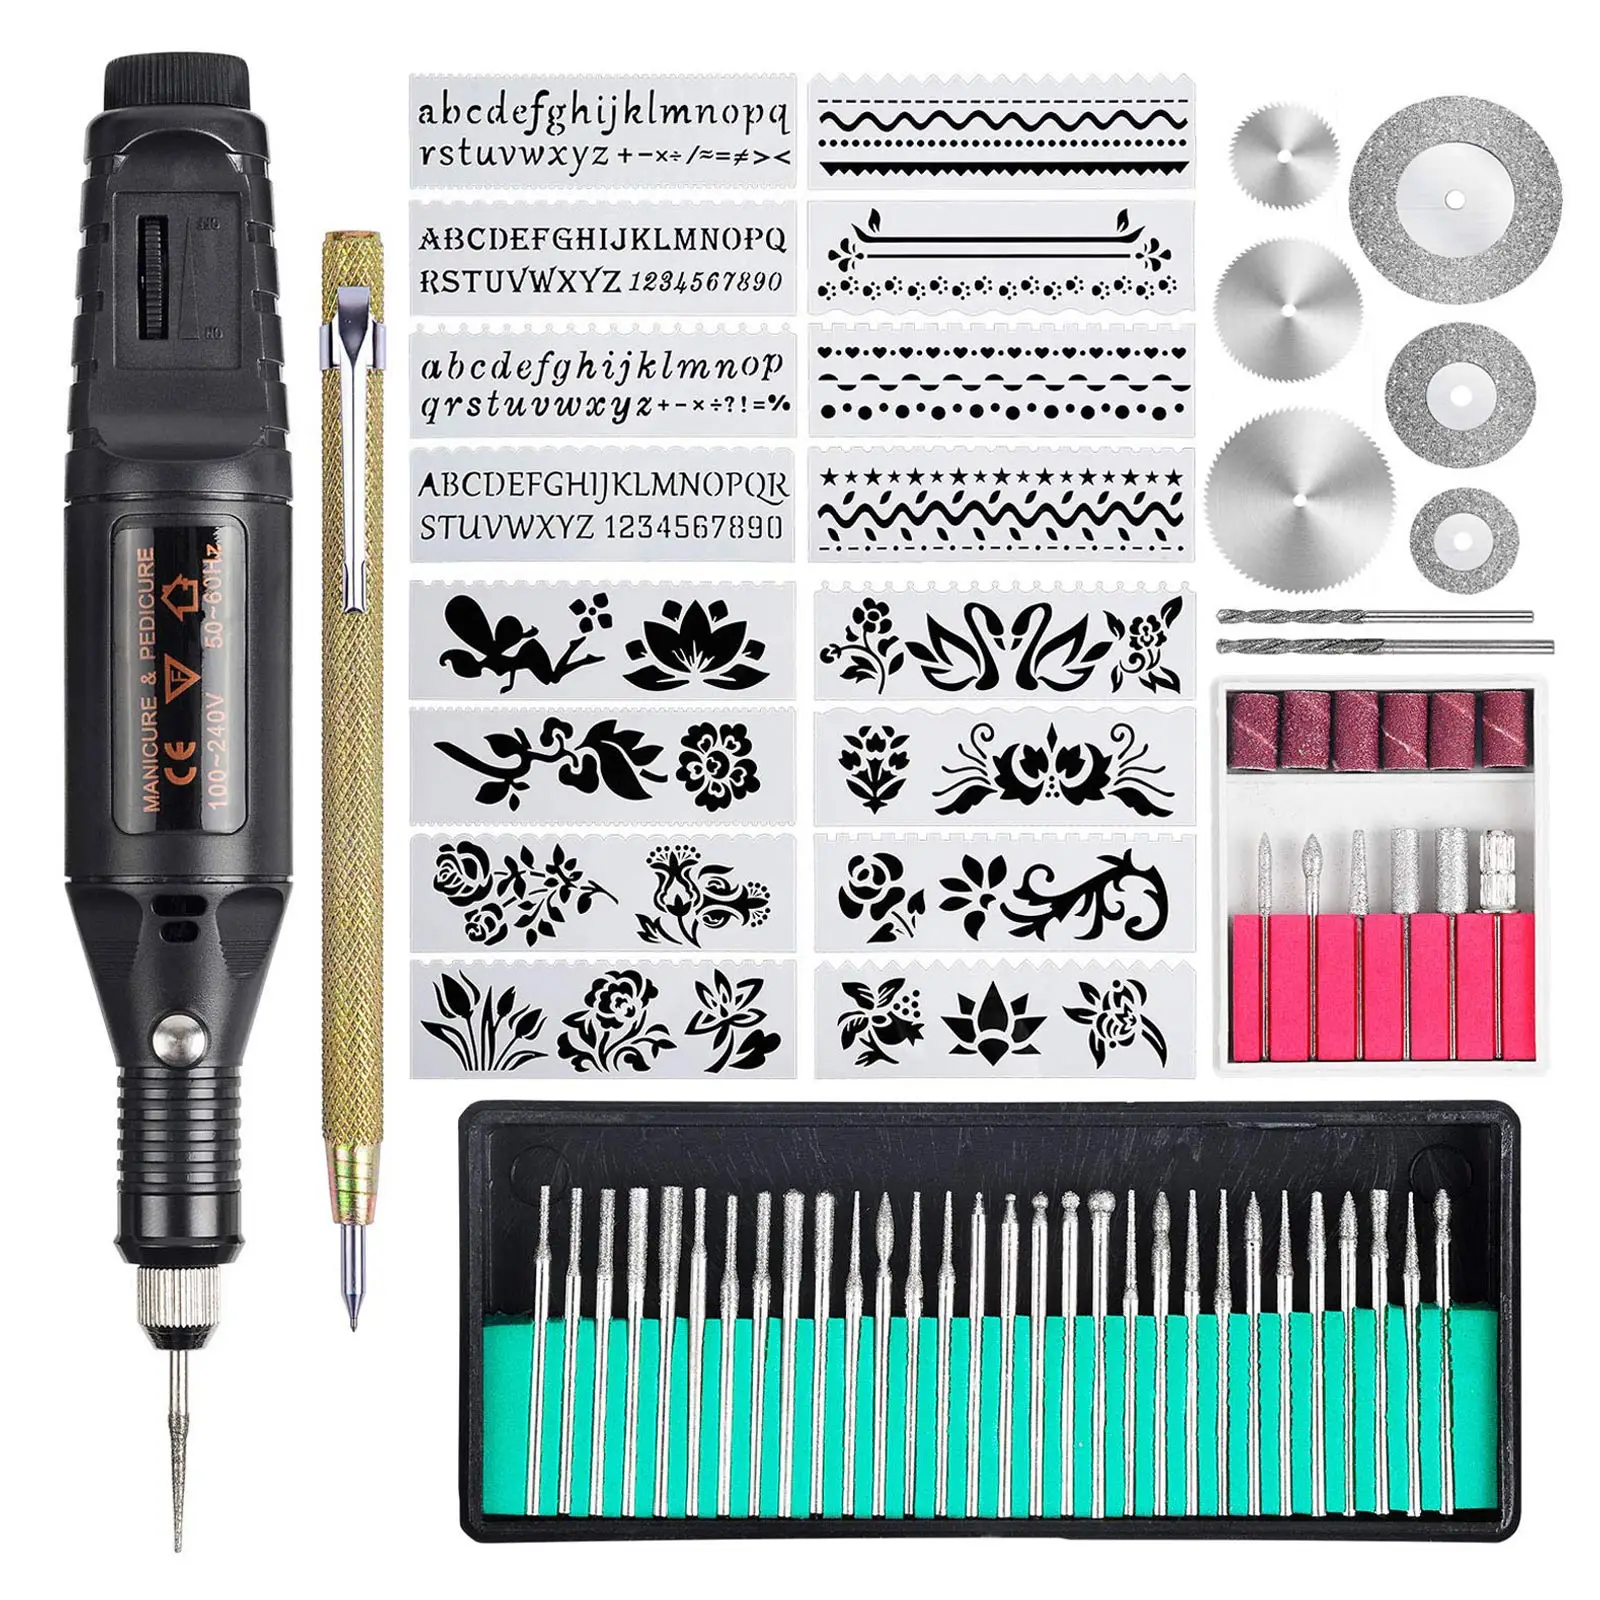 70Pcs Engraving Tool Kit Multifunctional Corded Engraver Pen DIY Rotary Tool for Jewelry Glass Wood Metal Electric Nail Art Dril 10pcs 0 8 3 175mm pcb end mill engraving bits set cnc router bits woodworking engraving wood router corn milling cutter pcb dril